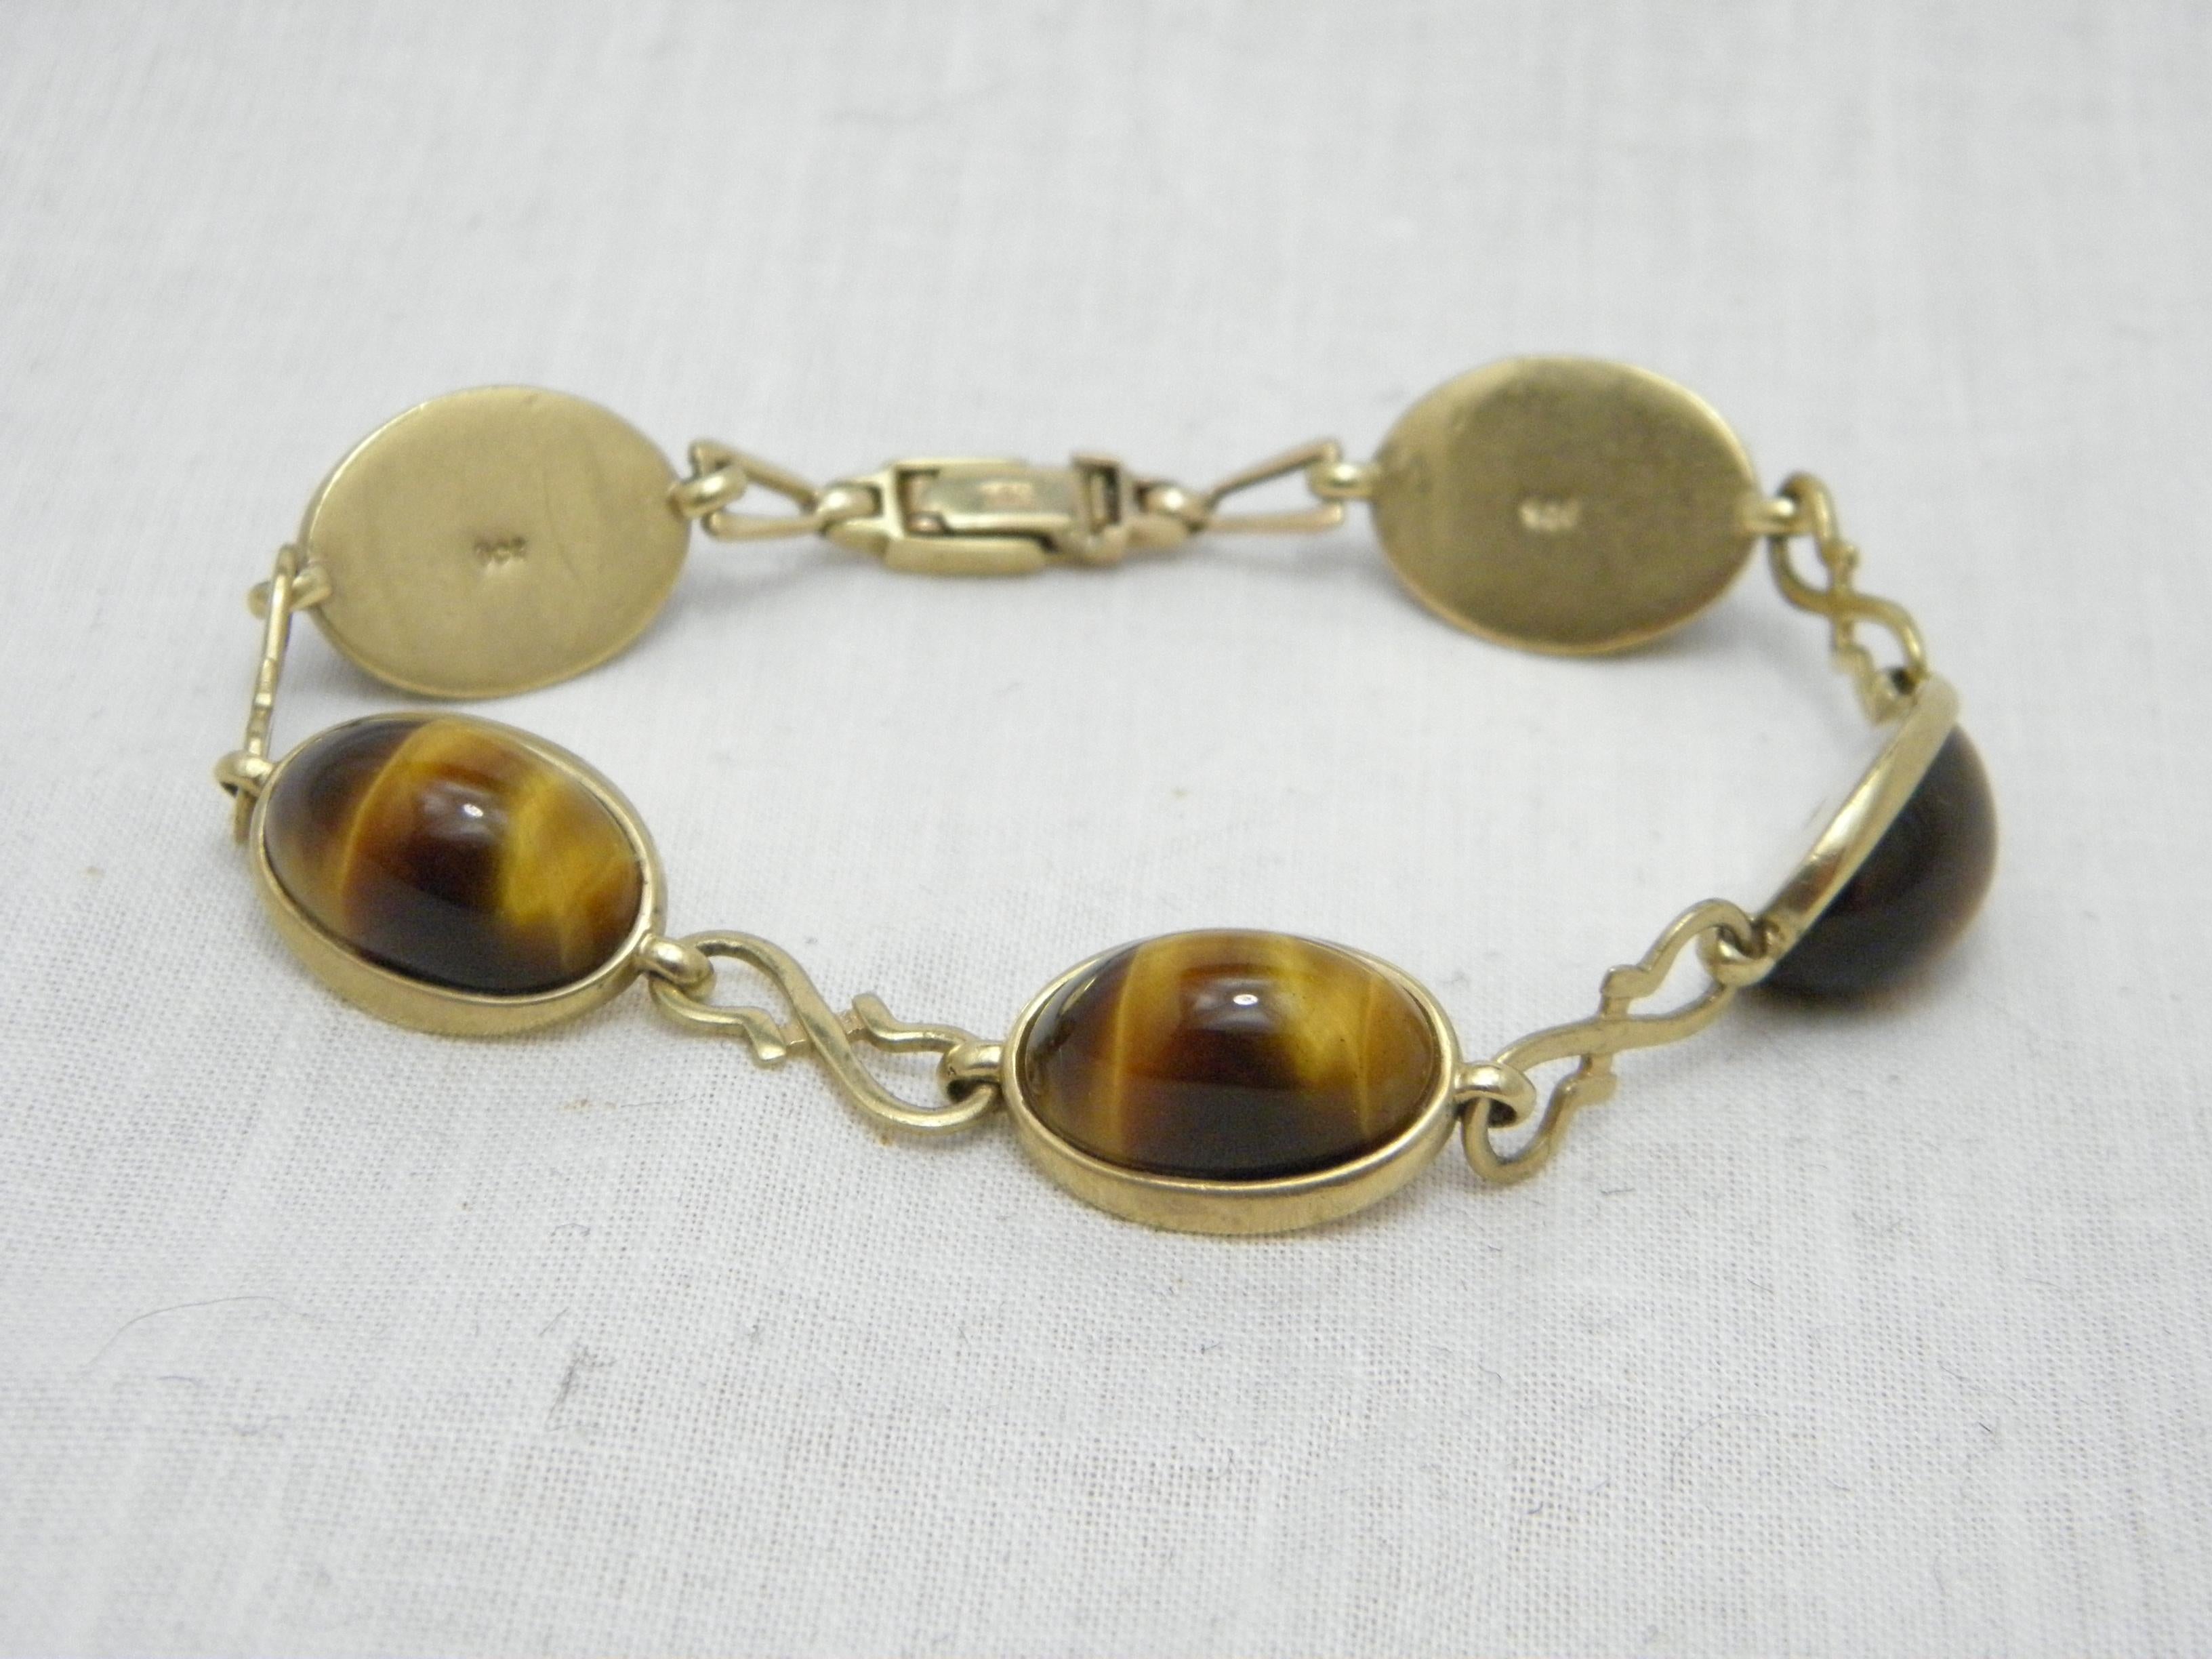 If you have landed on this page then you have an eye for beauty.

On offer is this gorgeous

9CT HEAVY GOLD TIGER'S EYE CABOCHON LINE BRACELET

DETAILS
Material: Solid 9ct (375/000) yellow gold
Gemstones: Lovely oval Tiger's Eye cabacons x 5
Style: